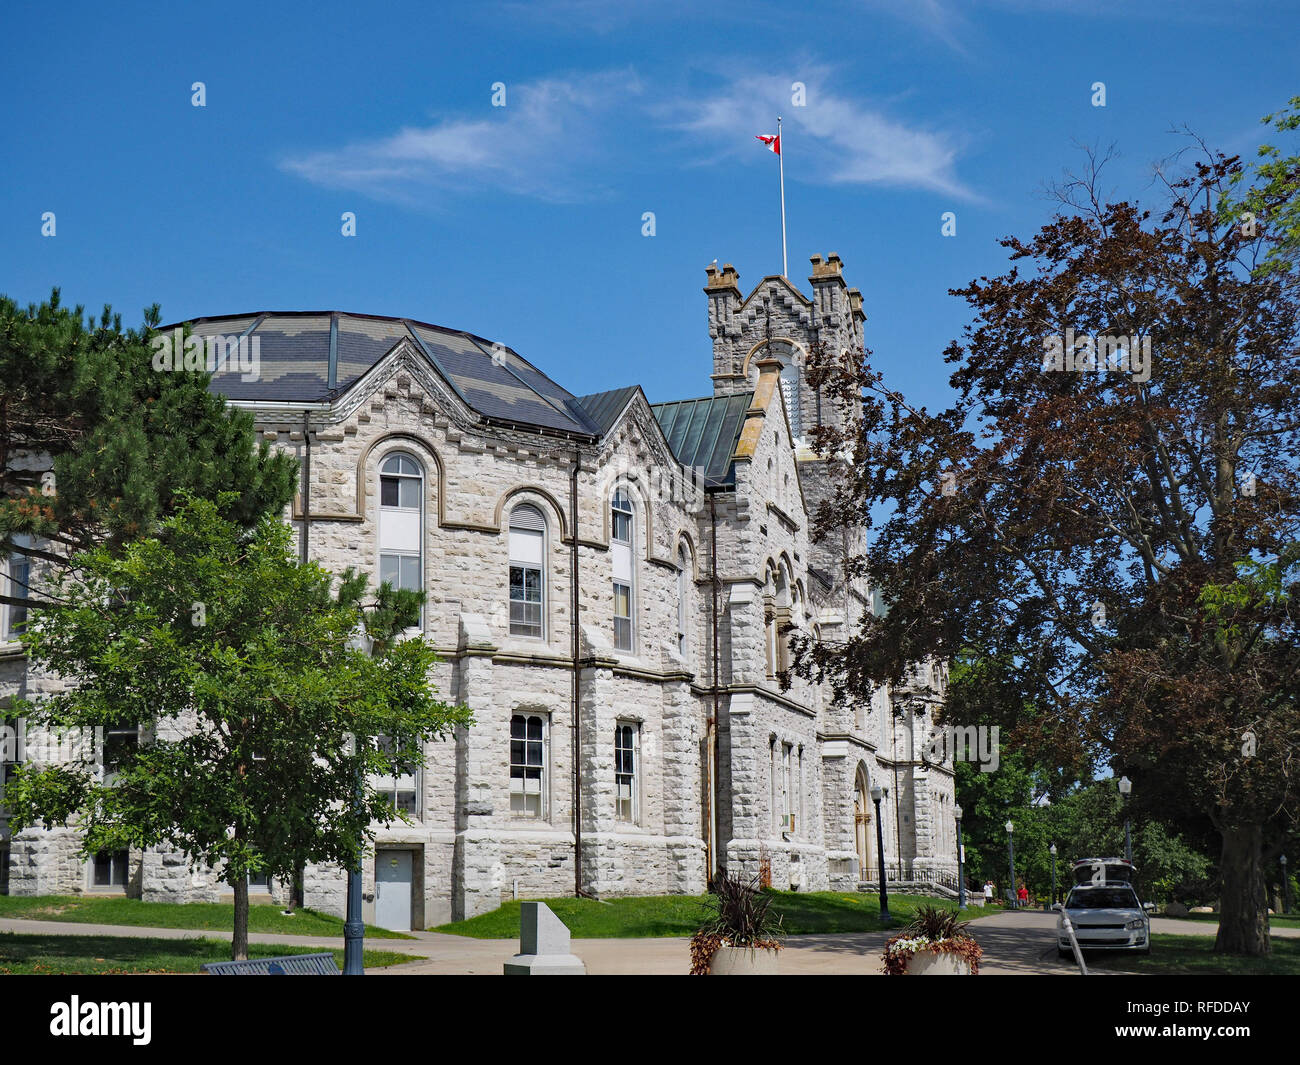 KINGSTON, ONTARIO, CANADA - Queen's University is one of Canada's oldest and most prestigious, with gothic stone buildings dating to the Victorian per Stock Photo